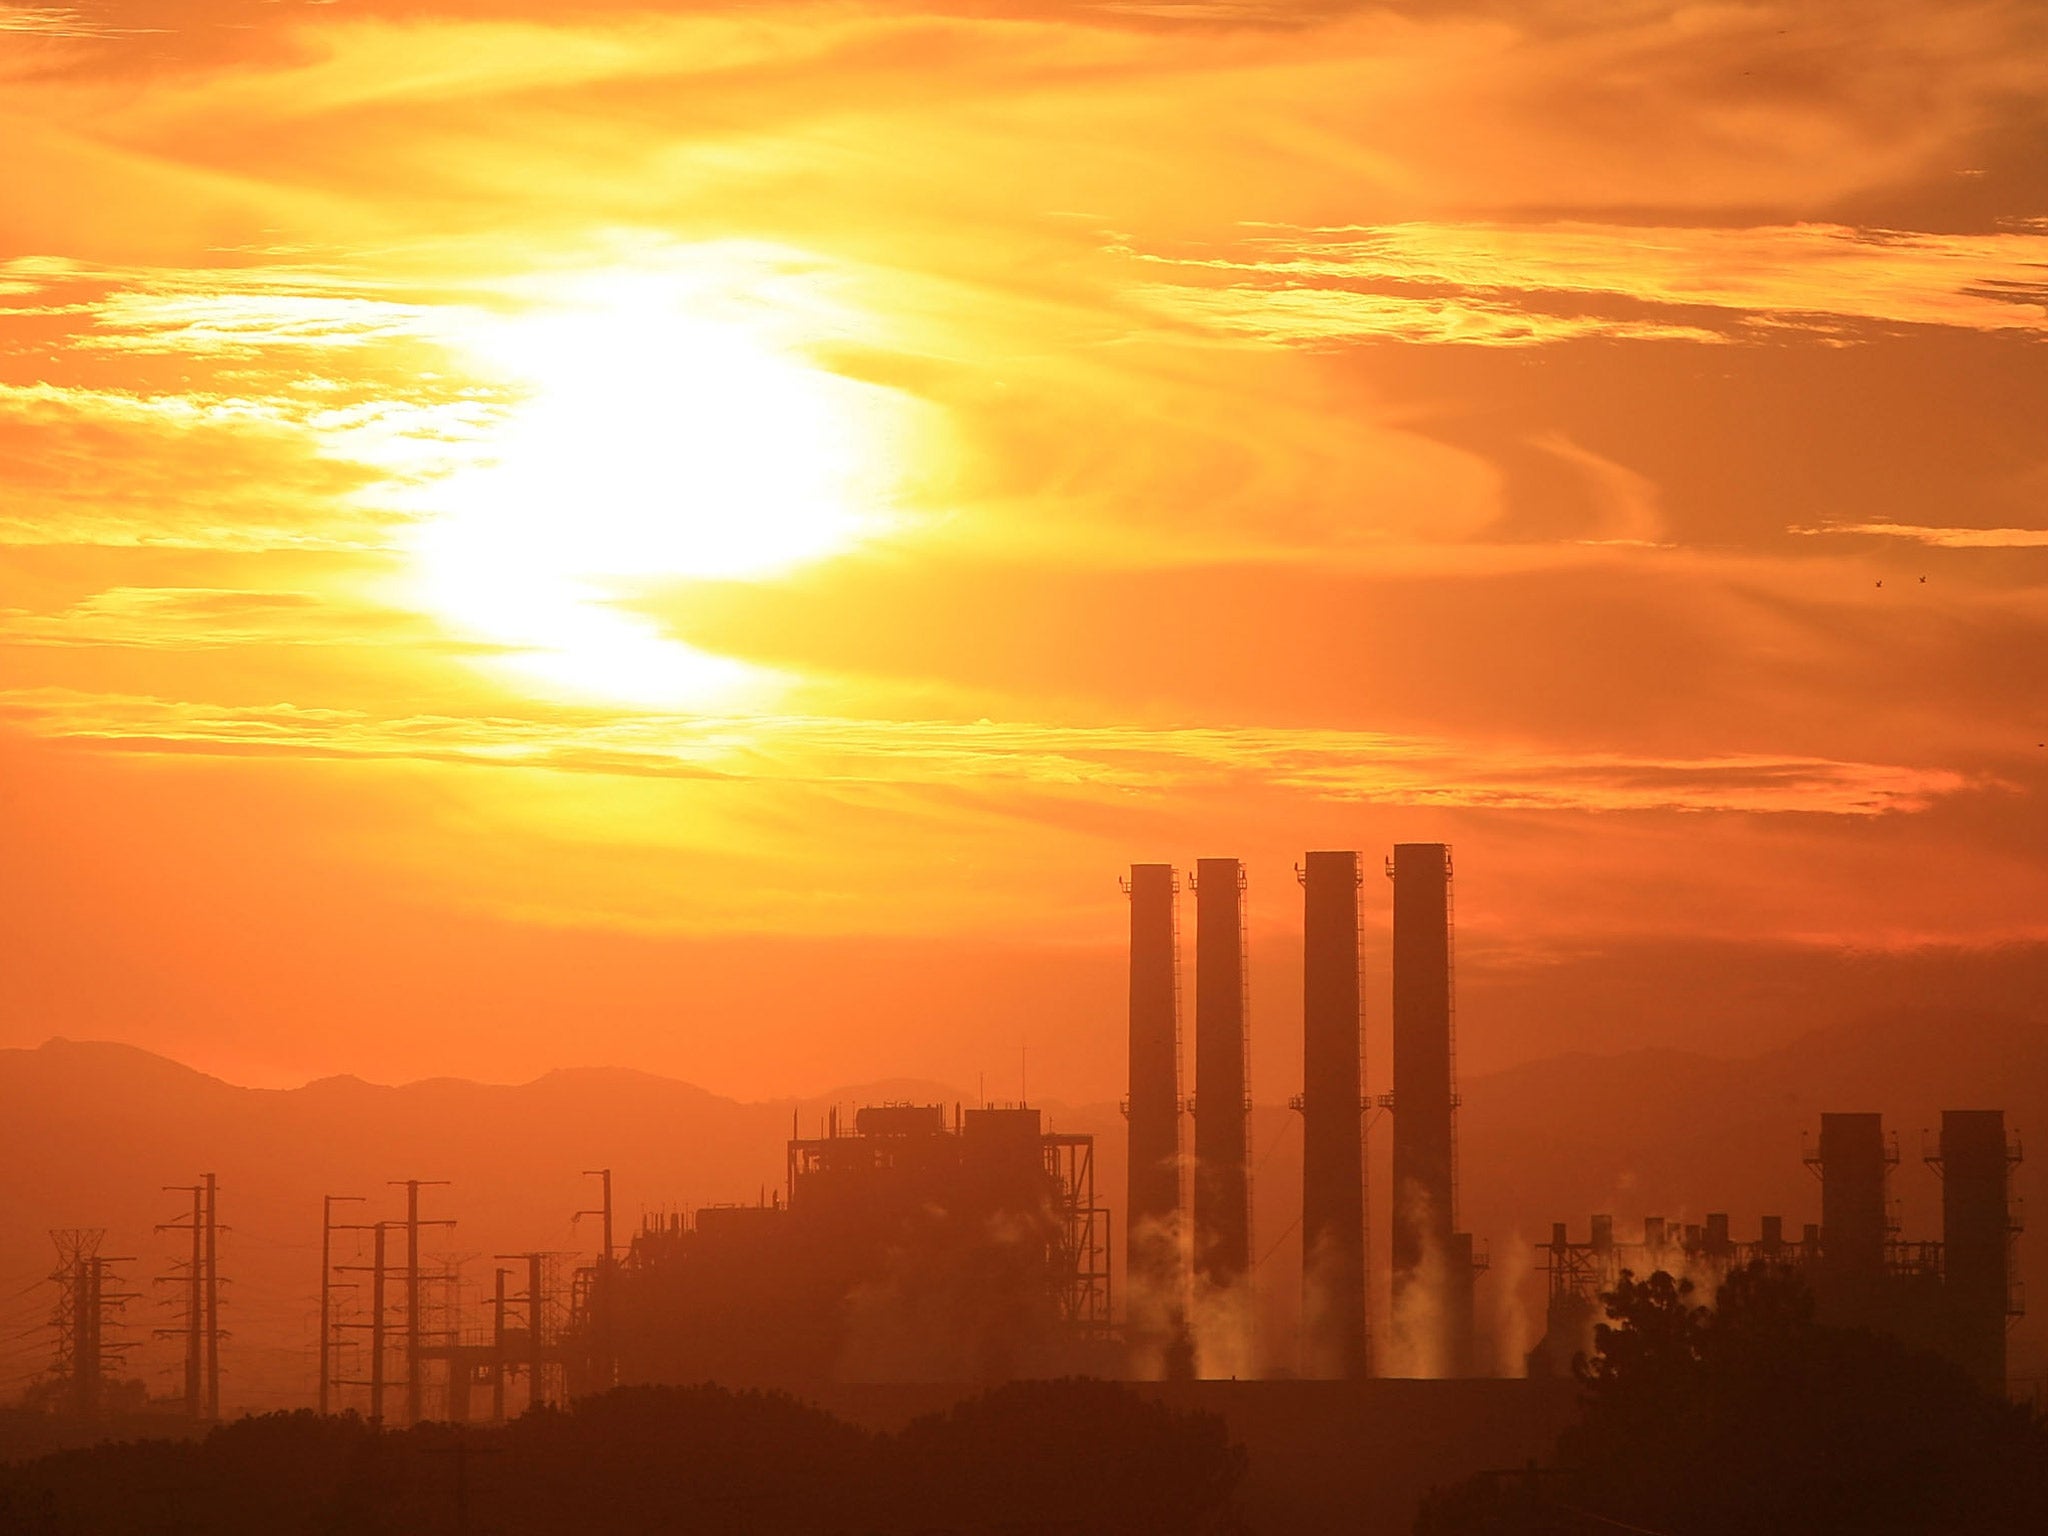 The Sun shines intensely above a power station in the Californian sky